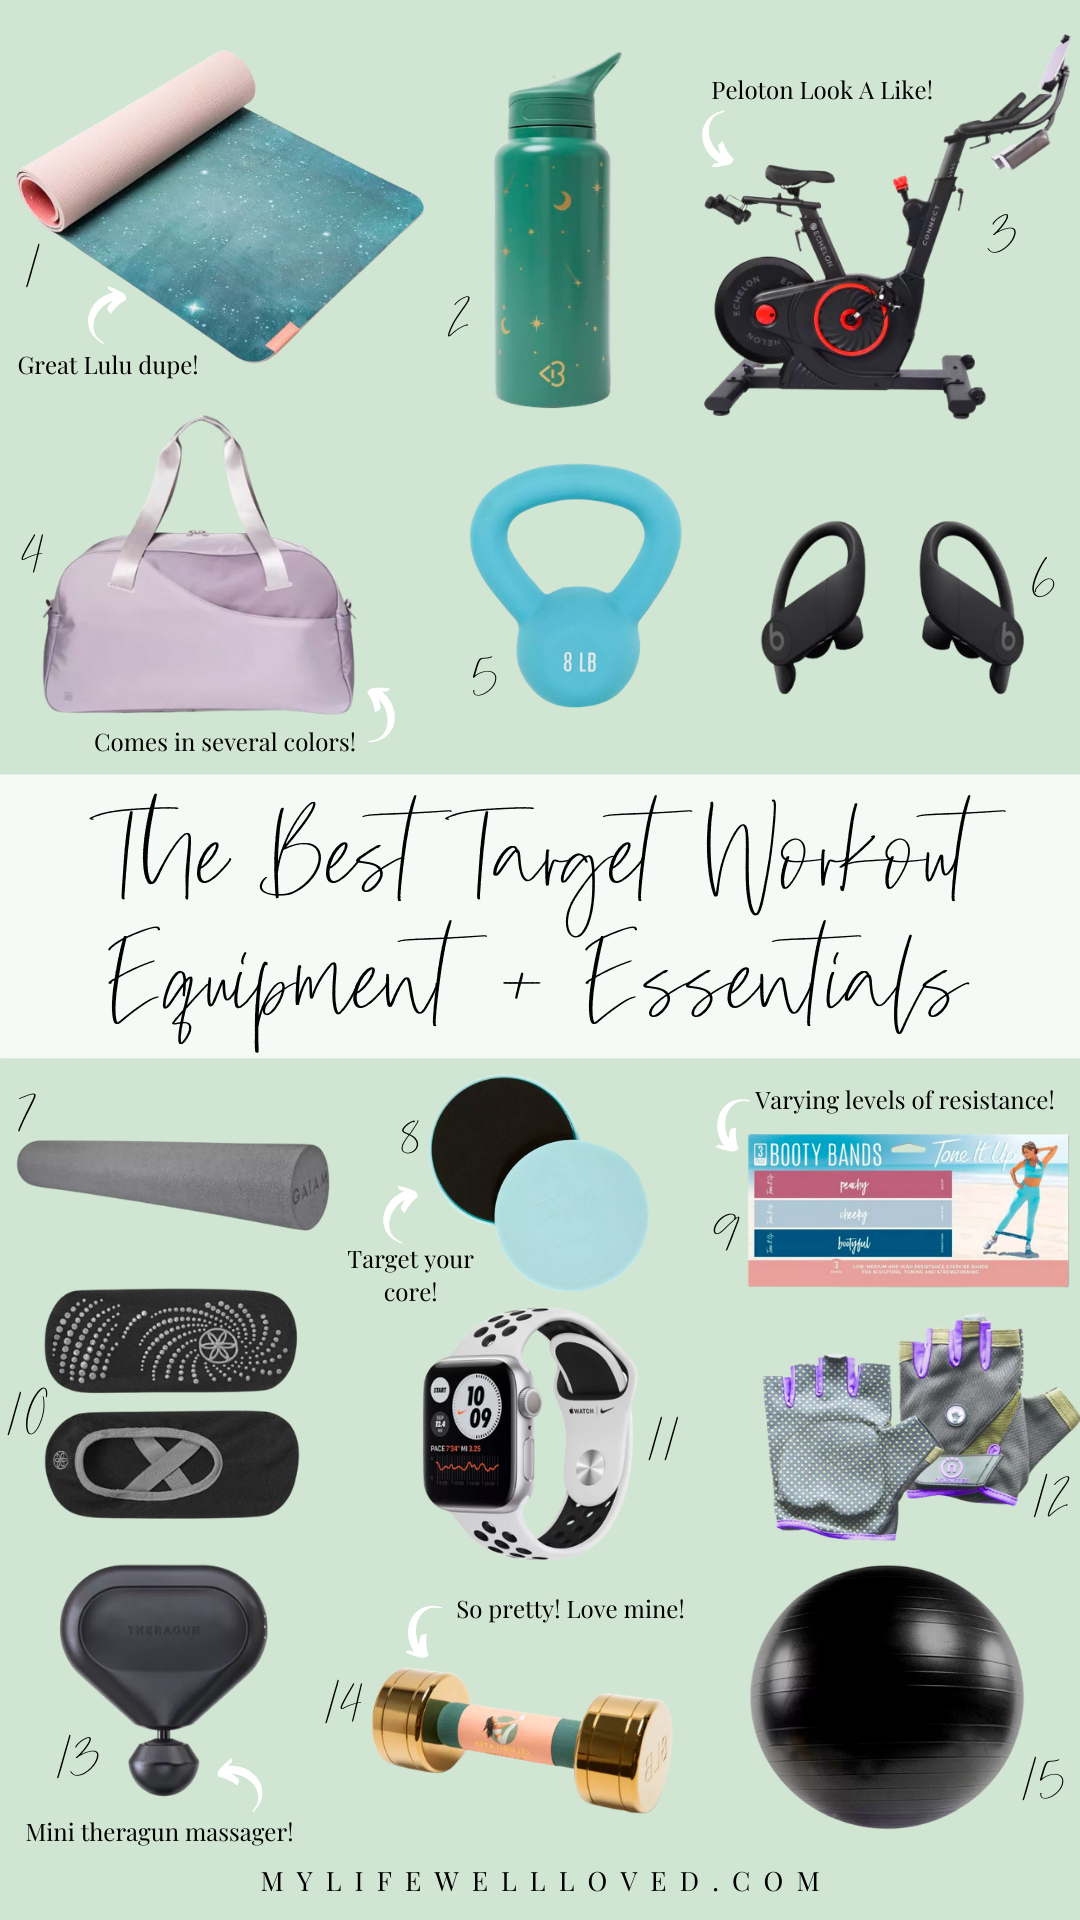 https://www.mylifewellloved.com/wp-content/uploads/The-Best-Target-Workout-Equipment-Essentials1.png